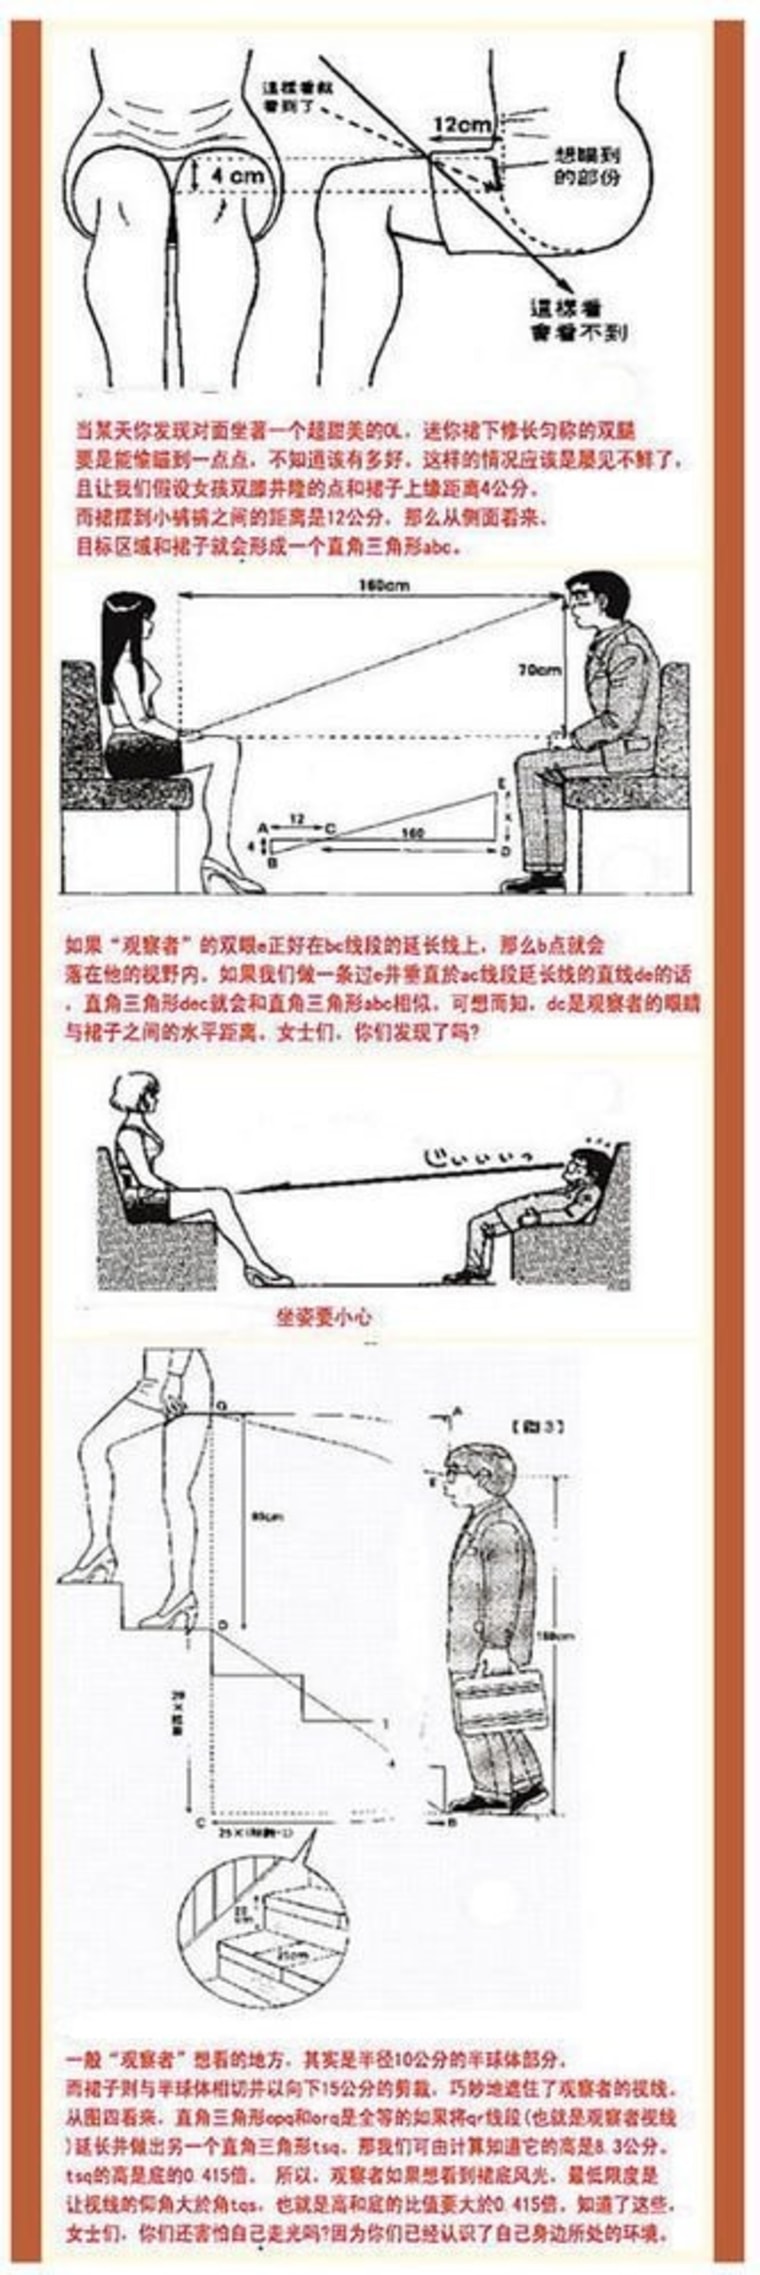 The Zhejiang province police department's diagram meant to give women guidance on how men's lurking eyes can lead to sexual harrassment.